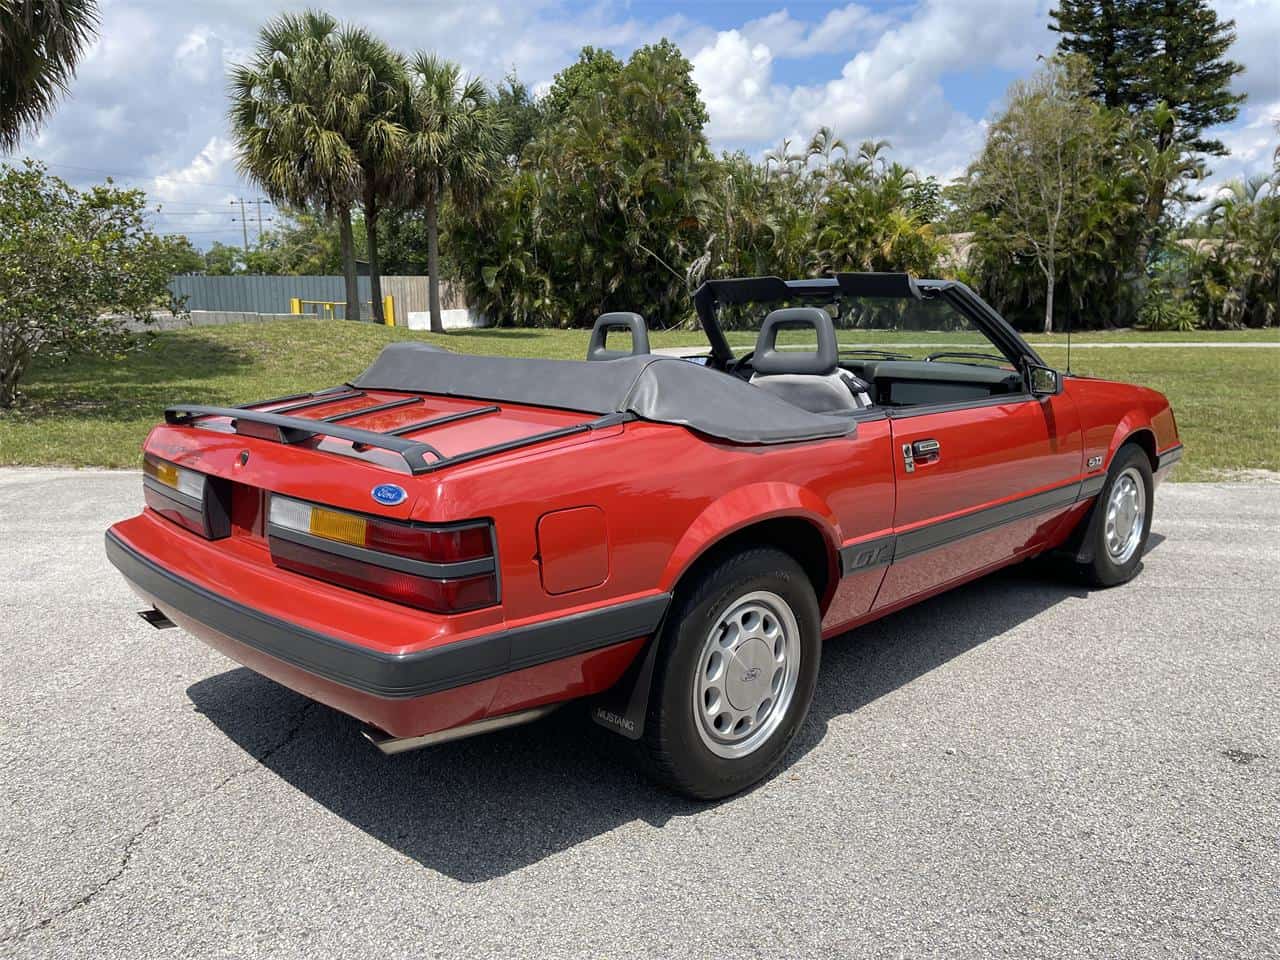 1986 ford mustang gt, Pick of the Day: 1986 Ford Mustang GT convertible, ClassicCars.com Journal